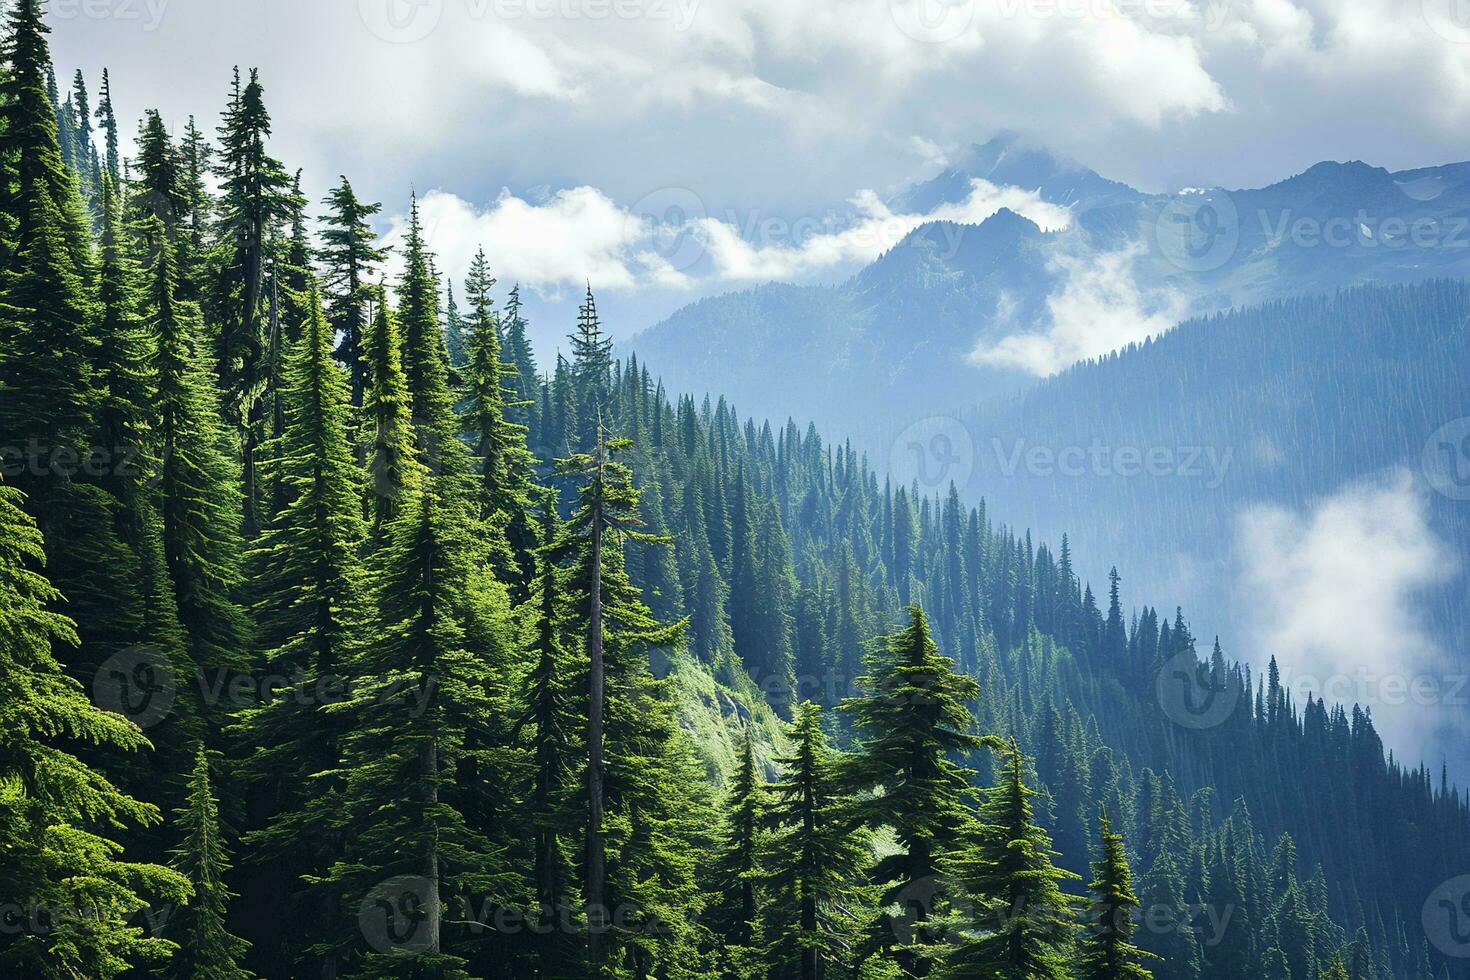 AI generated a breathtaking view of misty mountains surrounded by a dense, lush green forest under a partly cloudy sky. The atmosphere is serene with an air of tranquility and awe photo